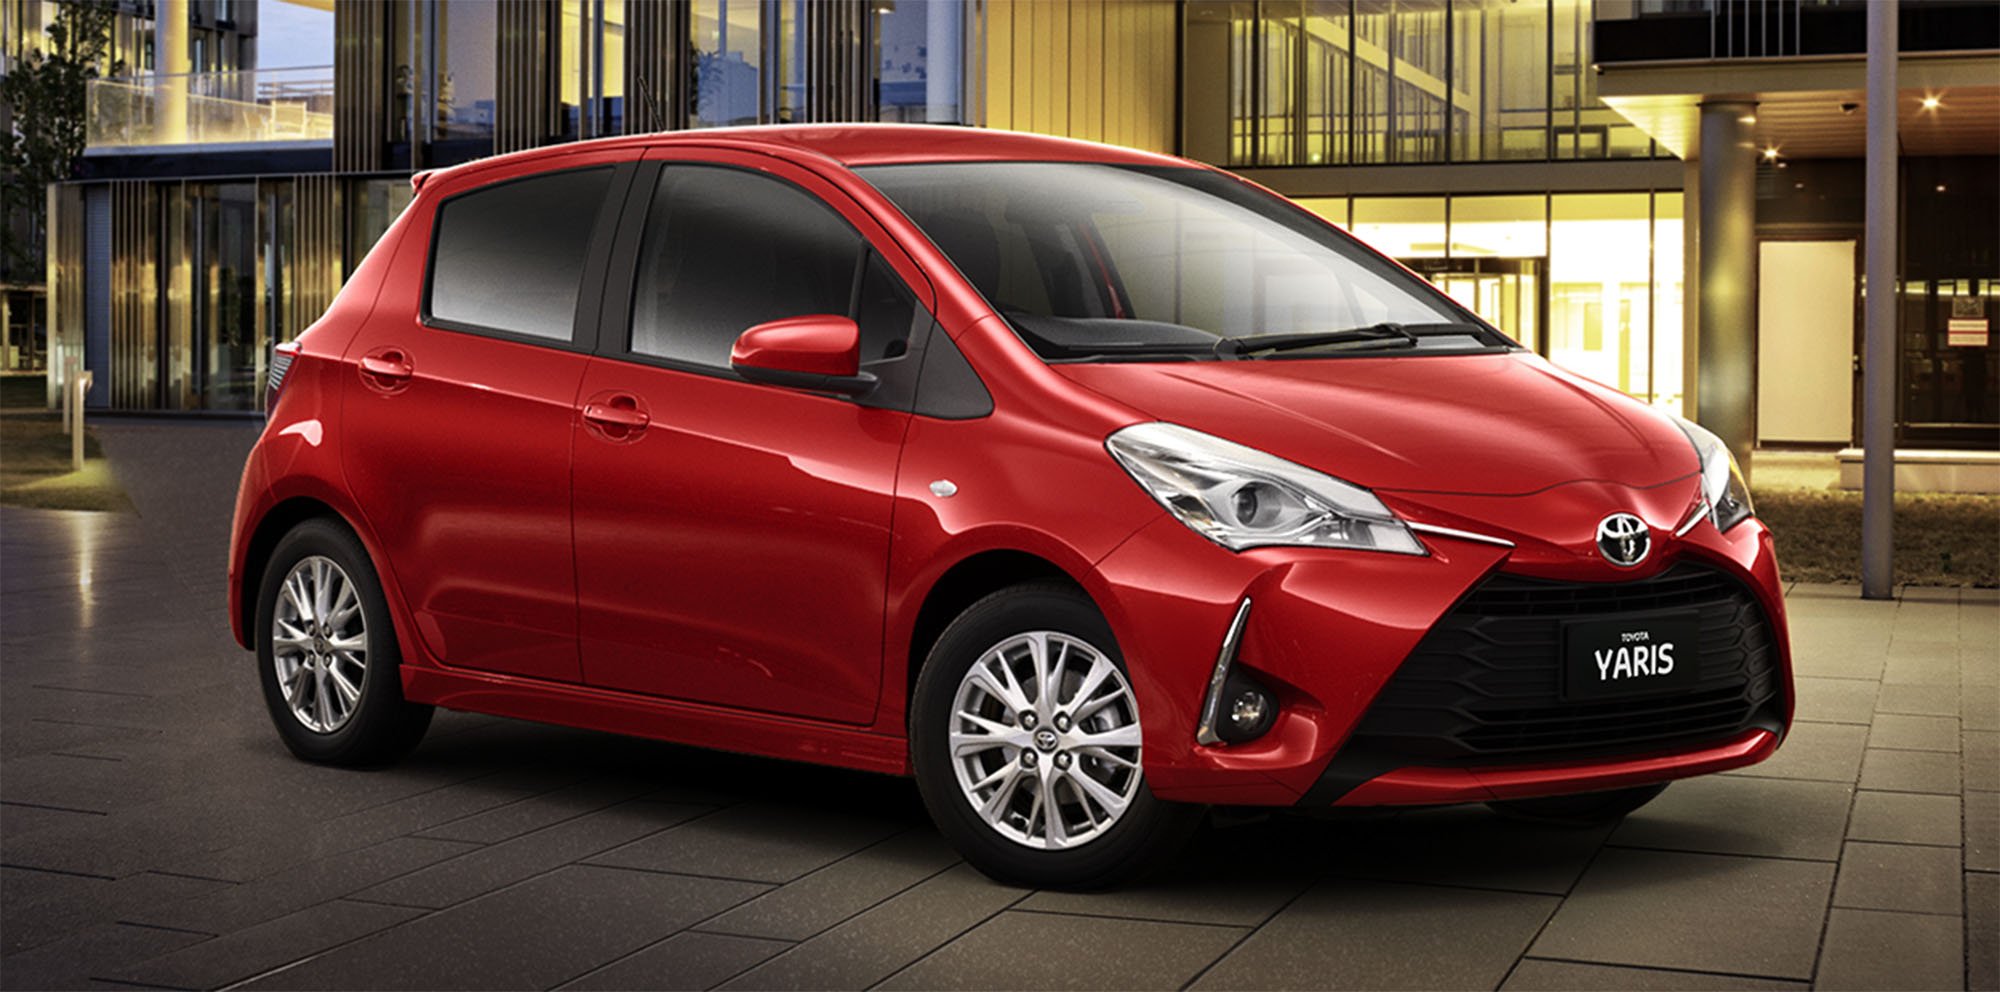 2017 Toyota Yaris pricing and specs UPDATE Photos (1 of 4)